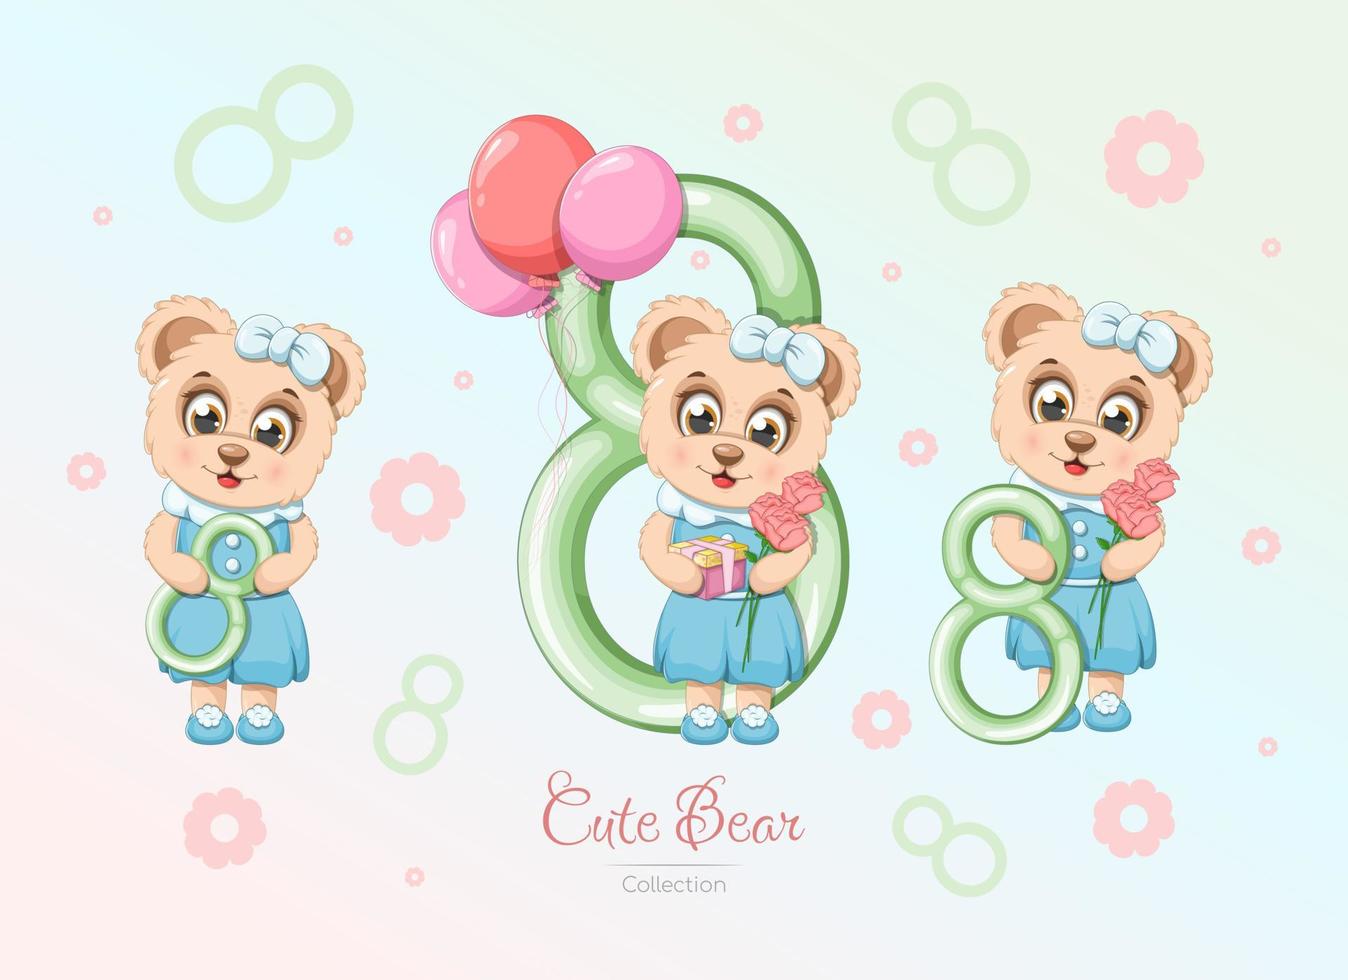 Collection of cute and cartoon bears with number 8 vector